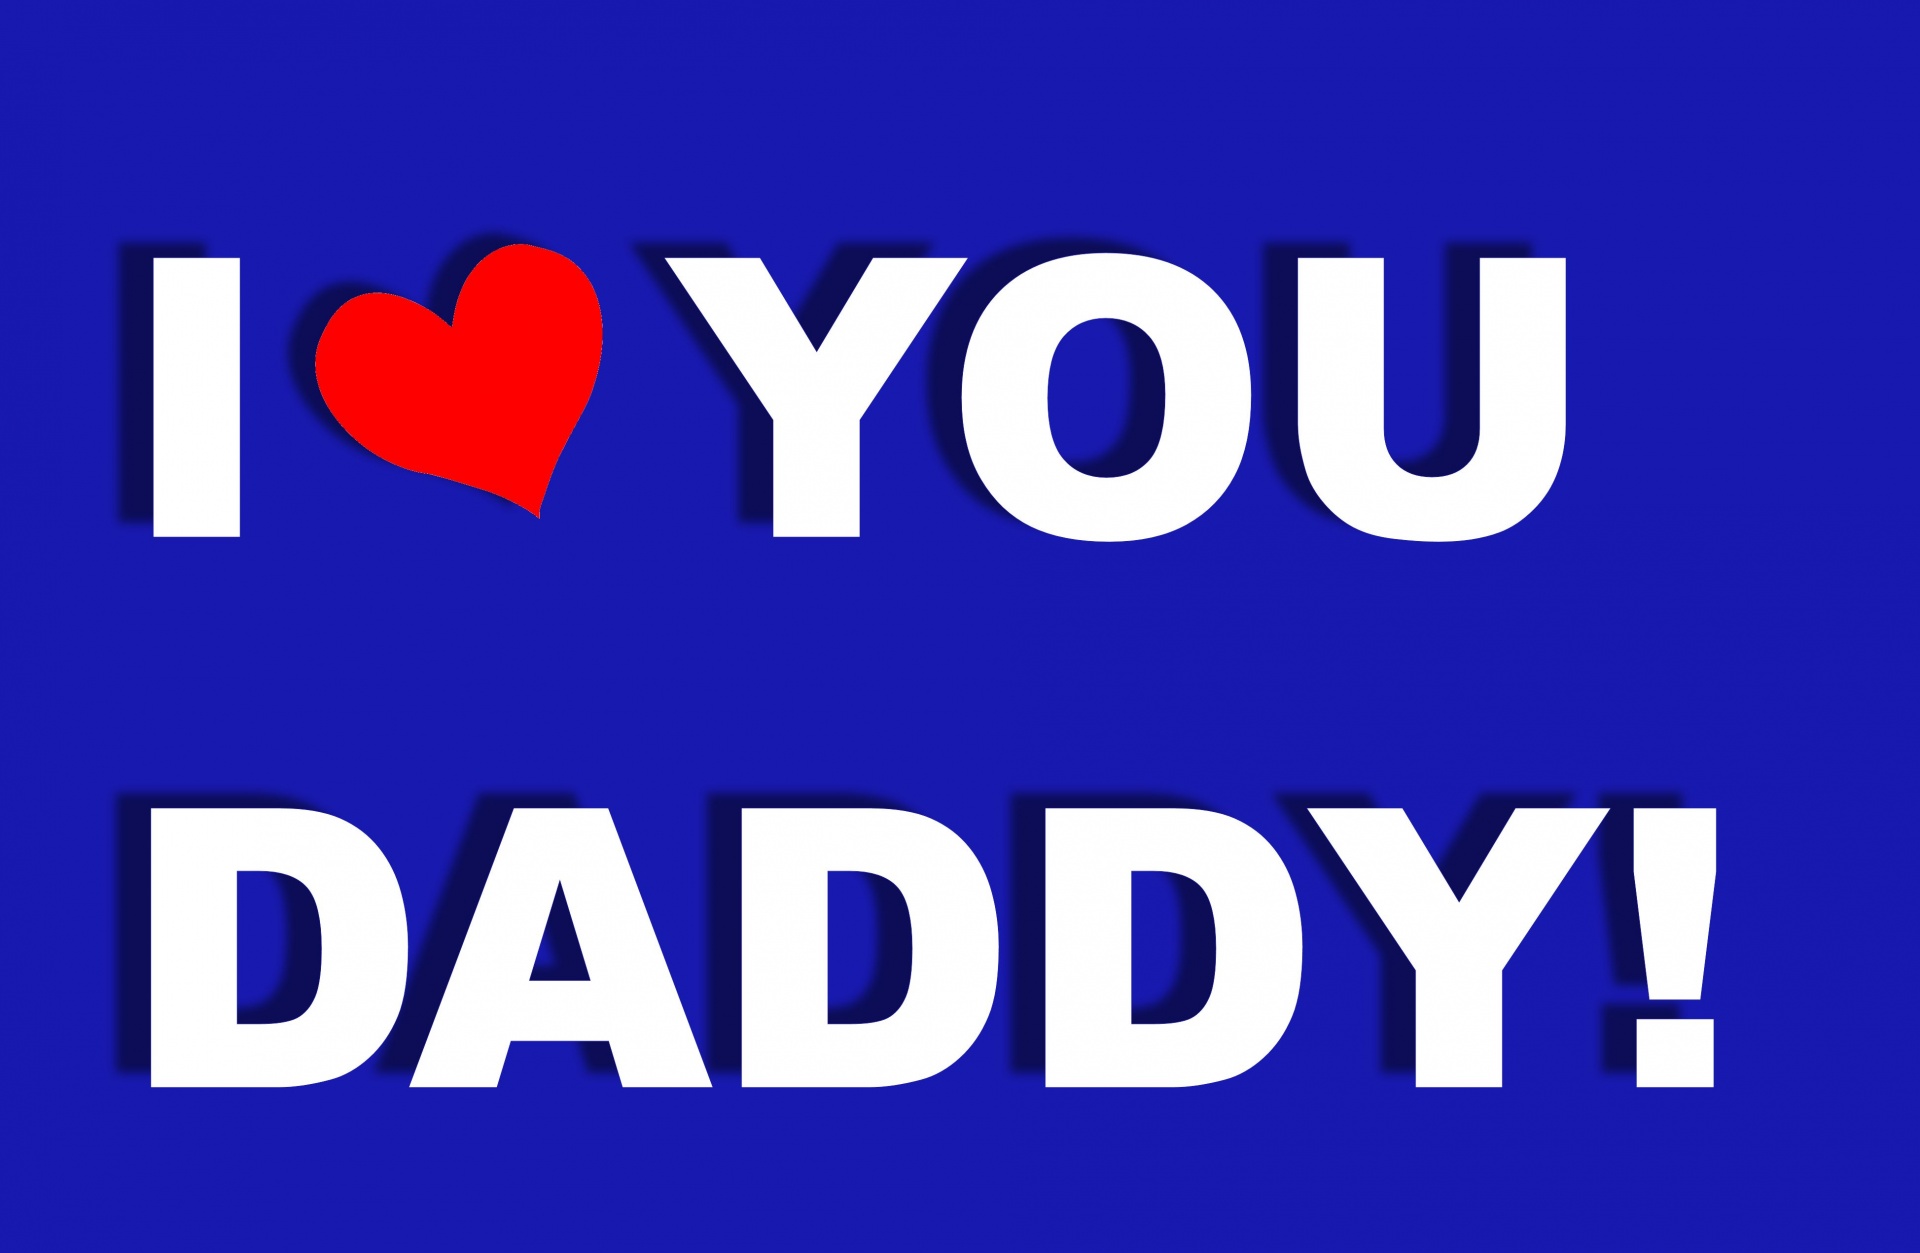 I love you, daddy, poster, background, heart